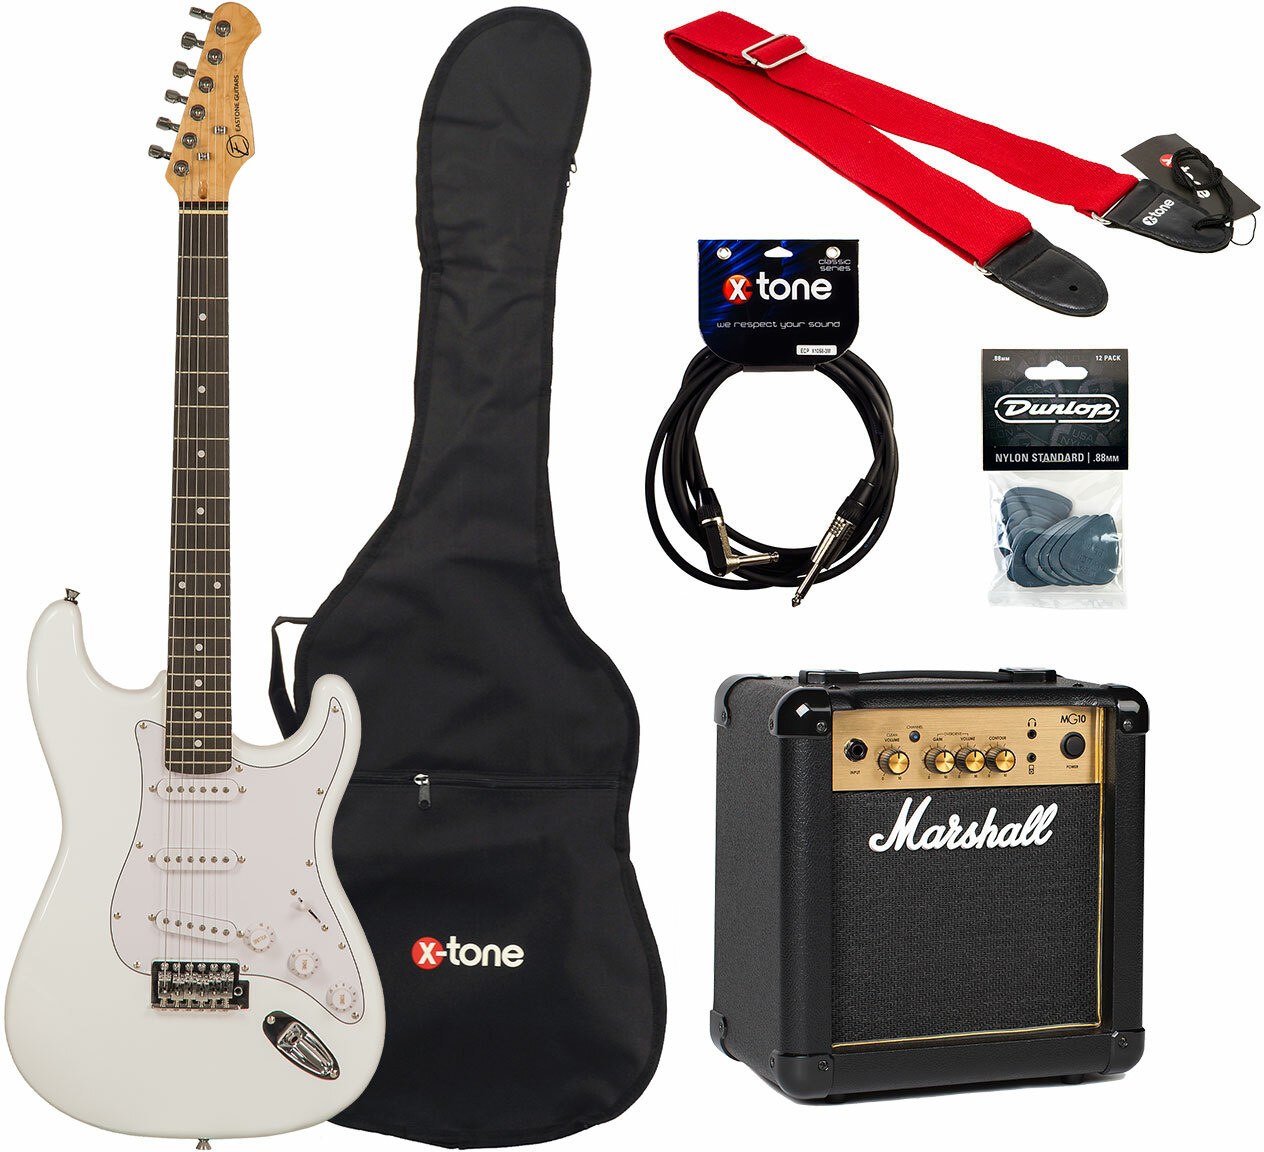 Eastone Str70 +marshall Mg10 10w +cable +mediators +housse - Olympic White - Electric guitar set - Main picture